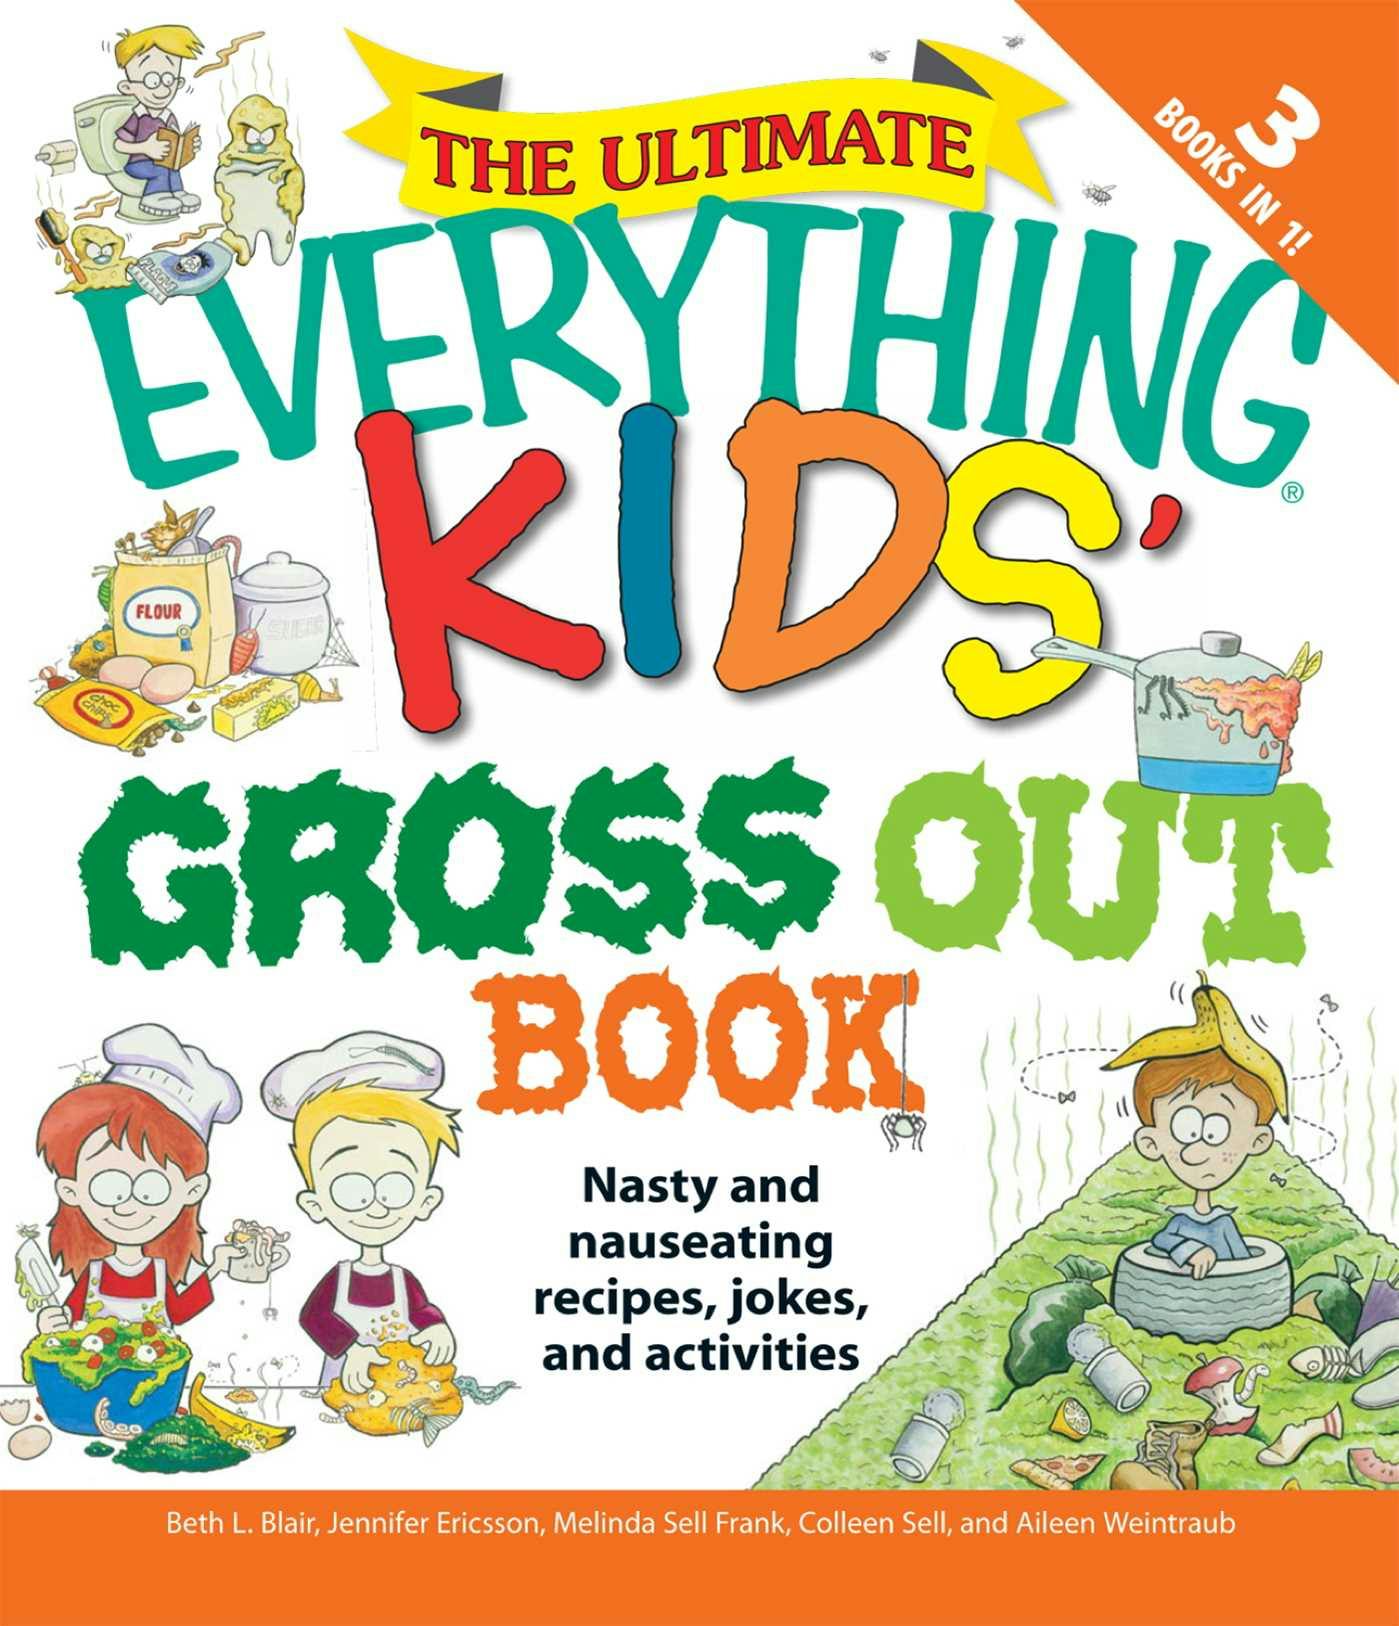 The Ultimate Everything Kids' Gross Out Book: Nasty and nauseating recipes, jokes and activitites - Aileen Weintraub, Melinda Sell Frank, Beth L Blair, Jennifer A Ericsson, Colleen Sell